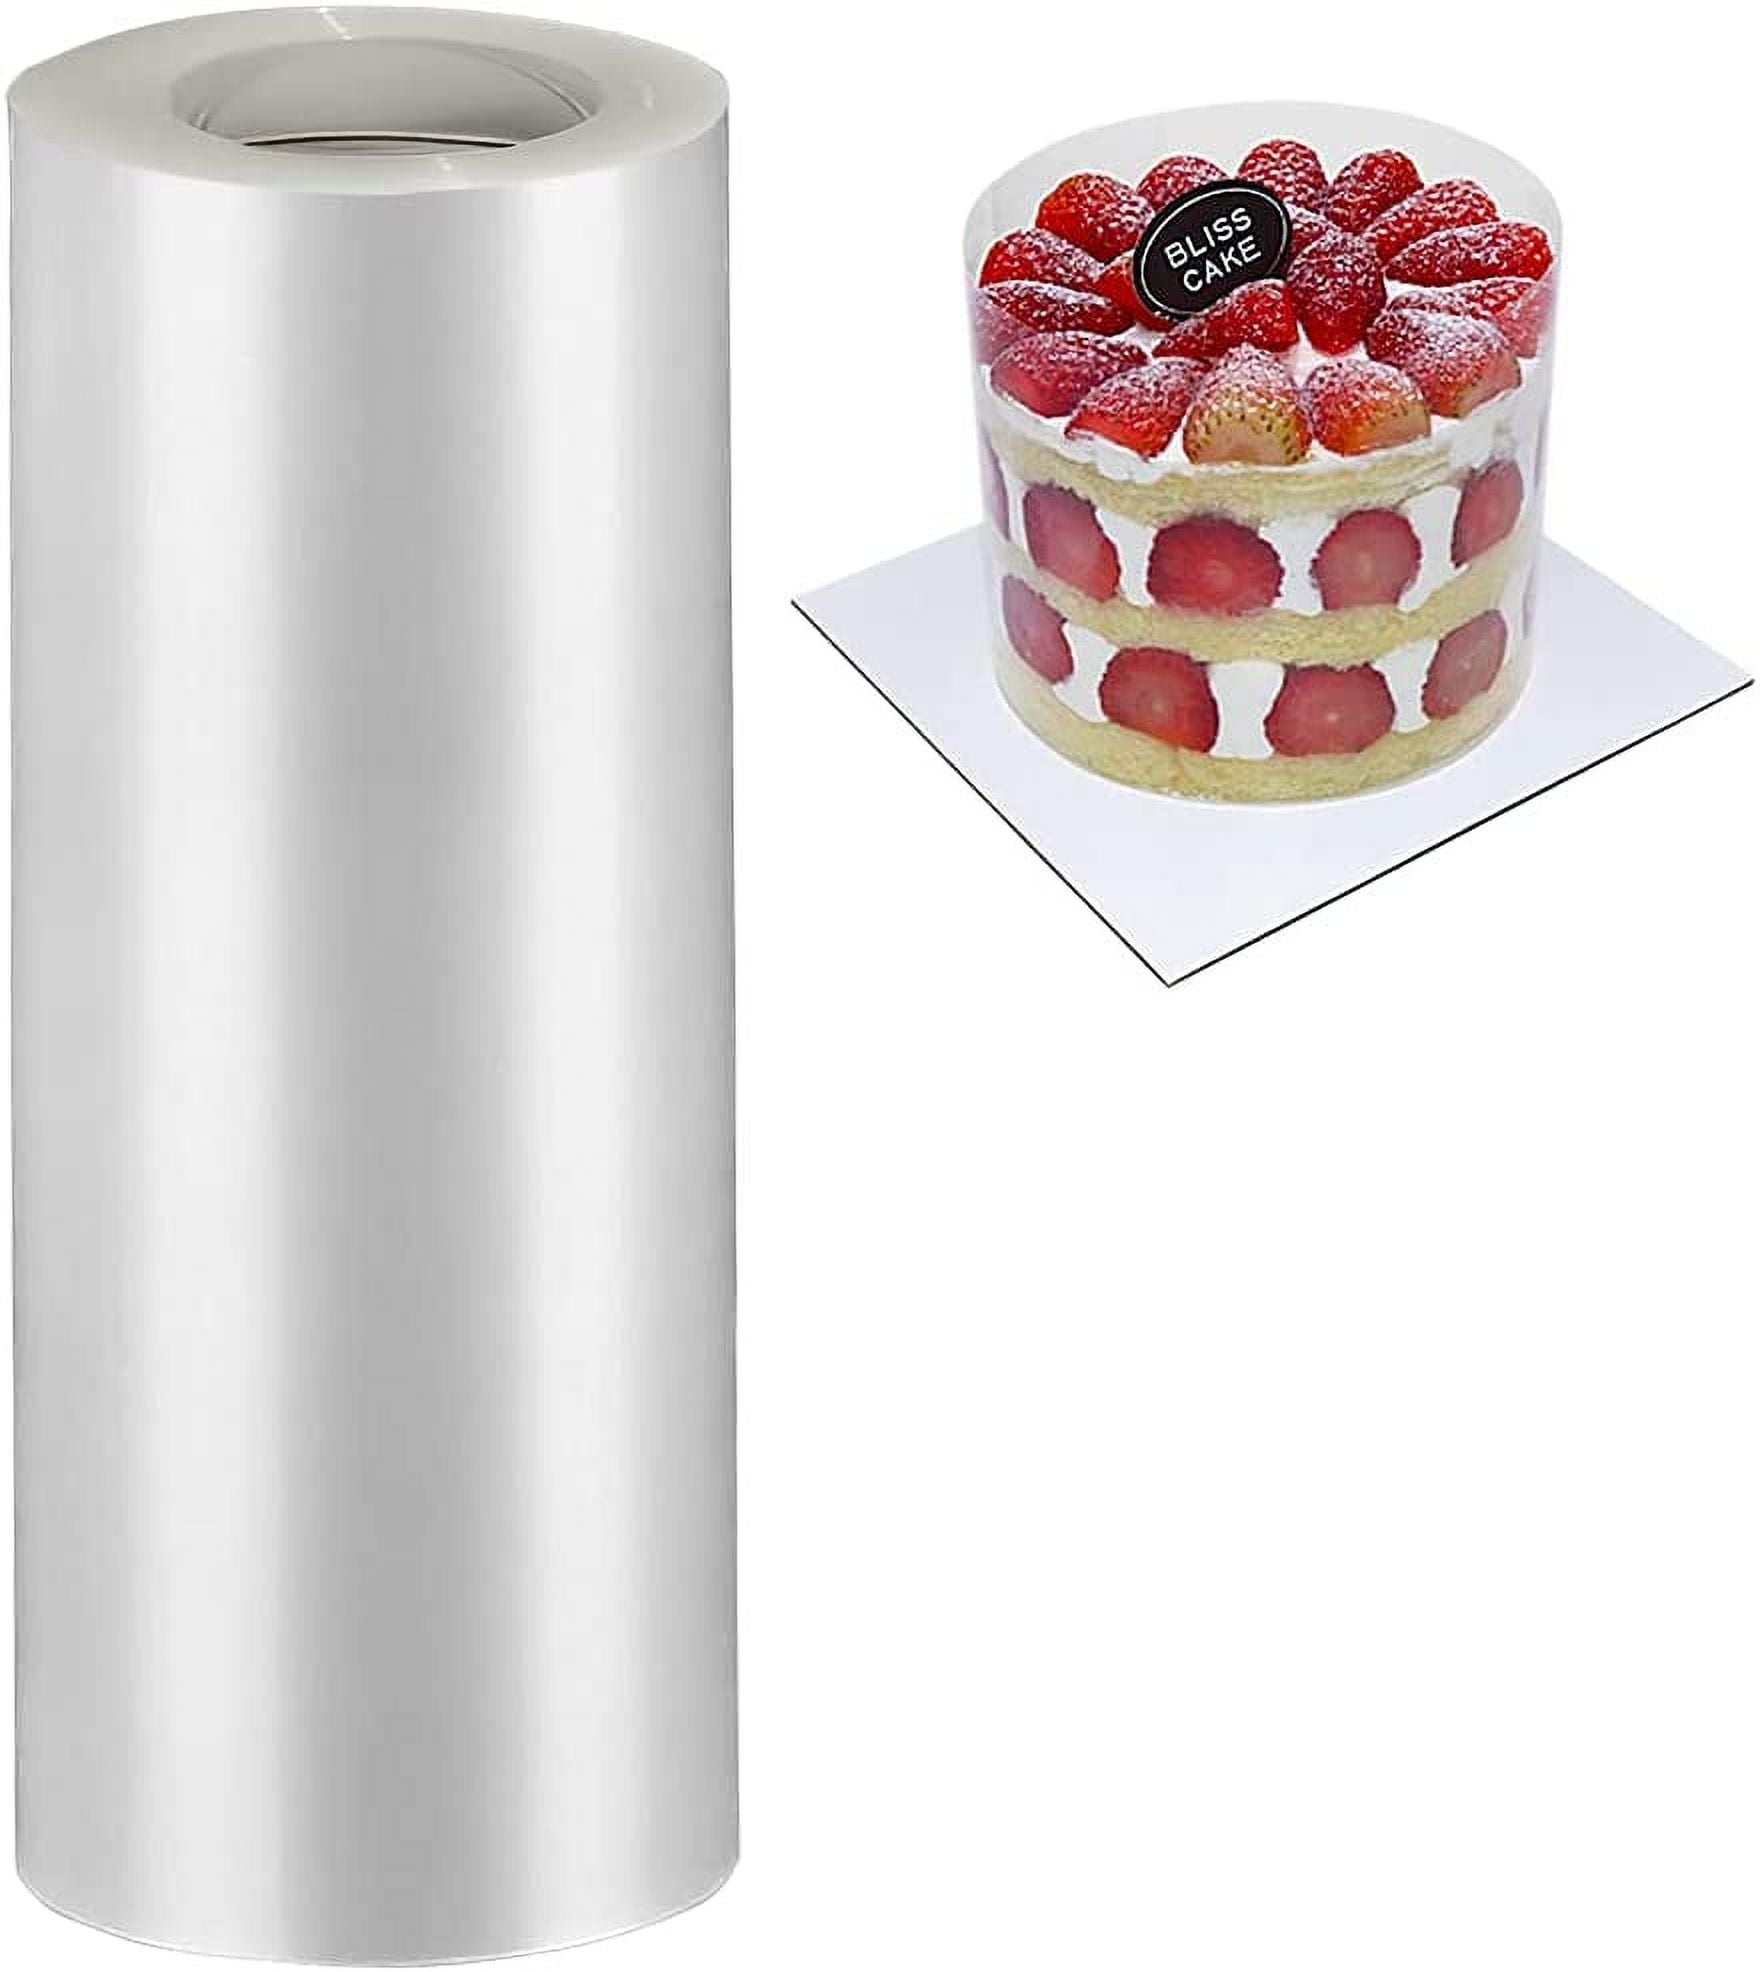  2 Pack Cake Collars 8 x 394 Inch, Clear Cake Rolls